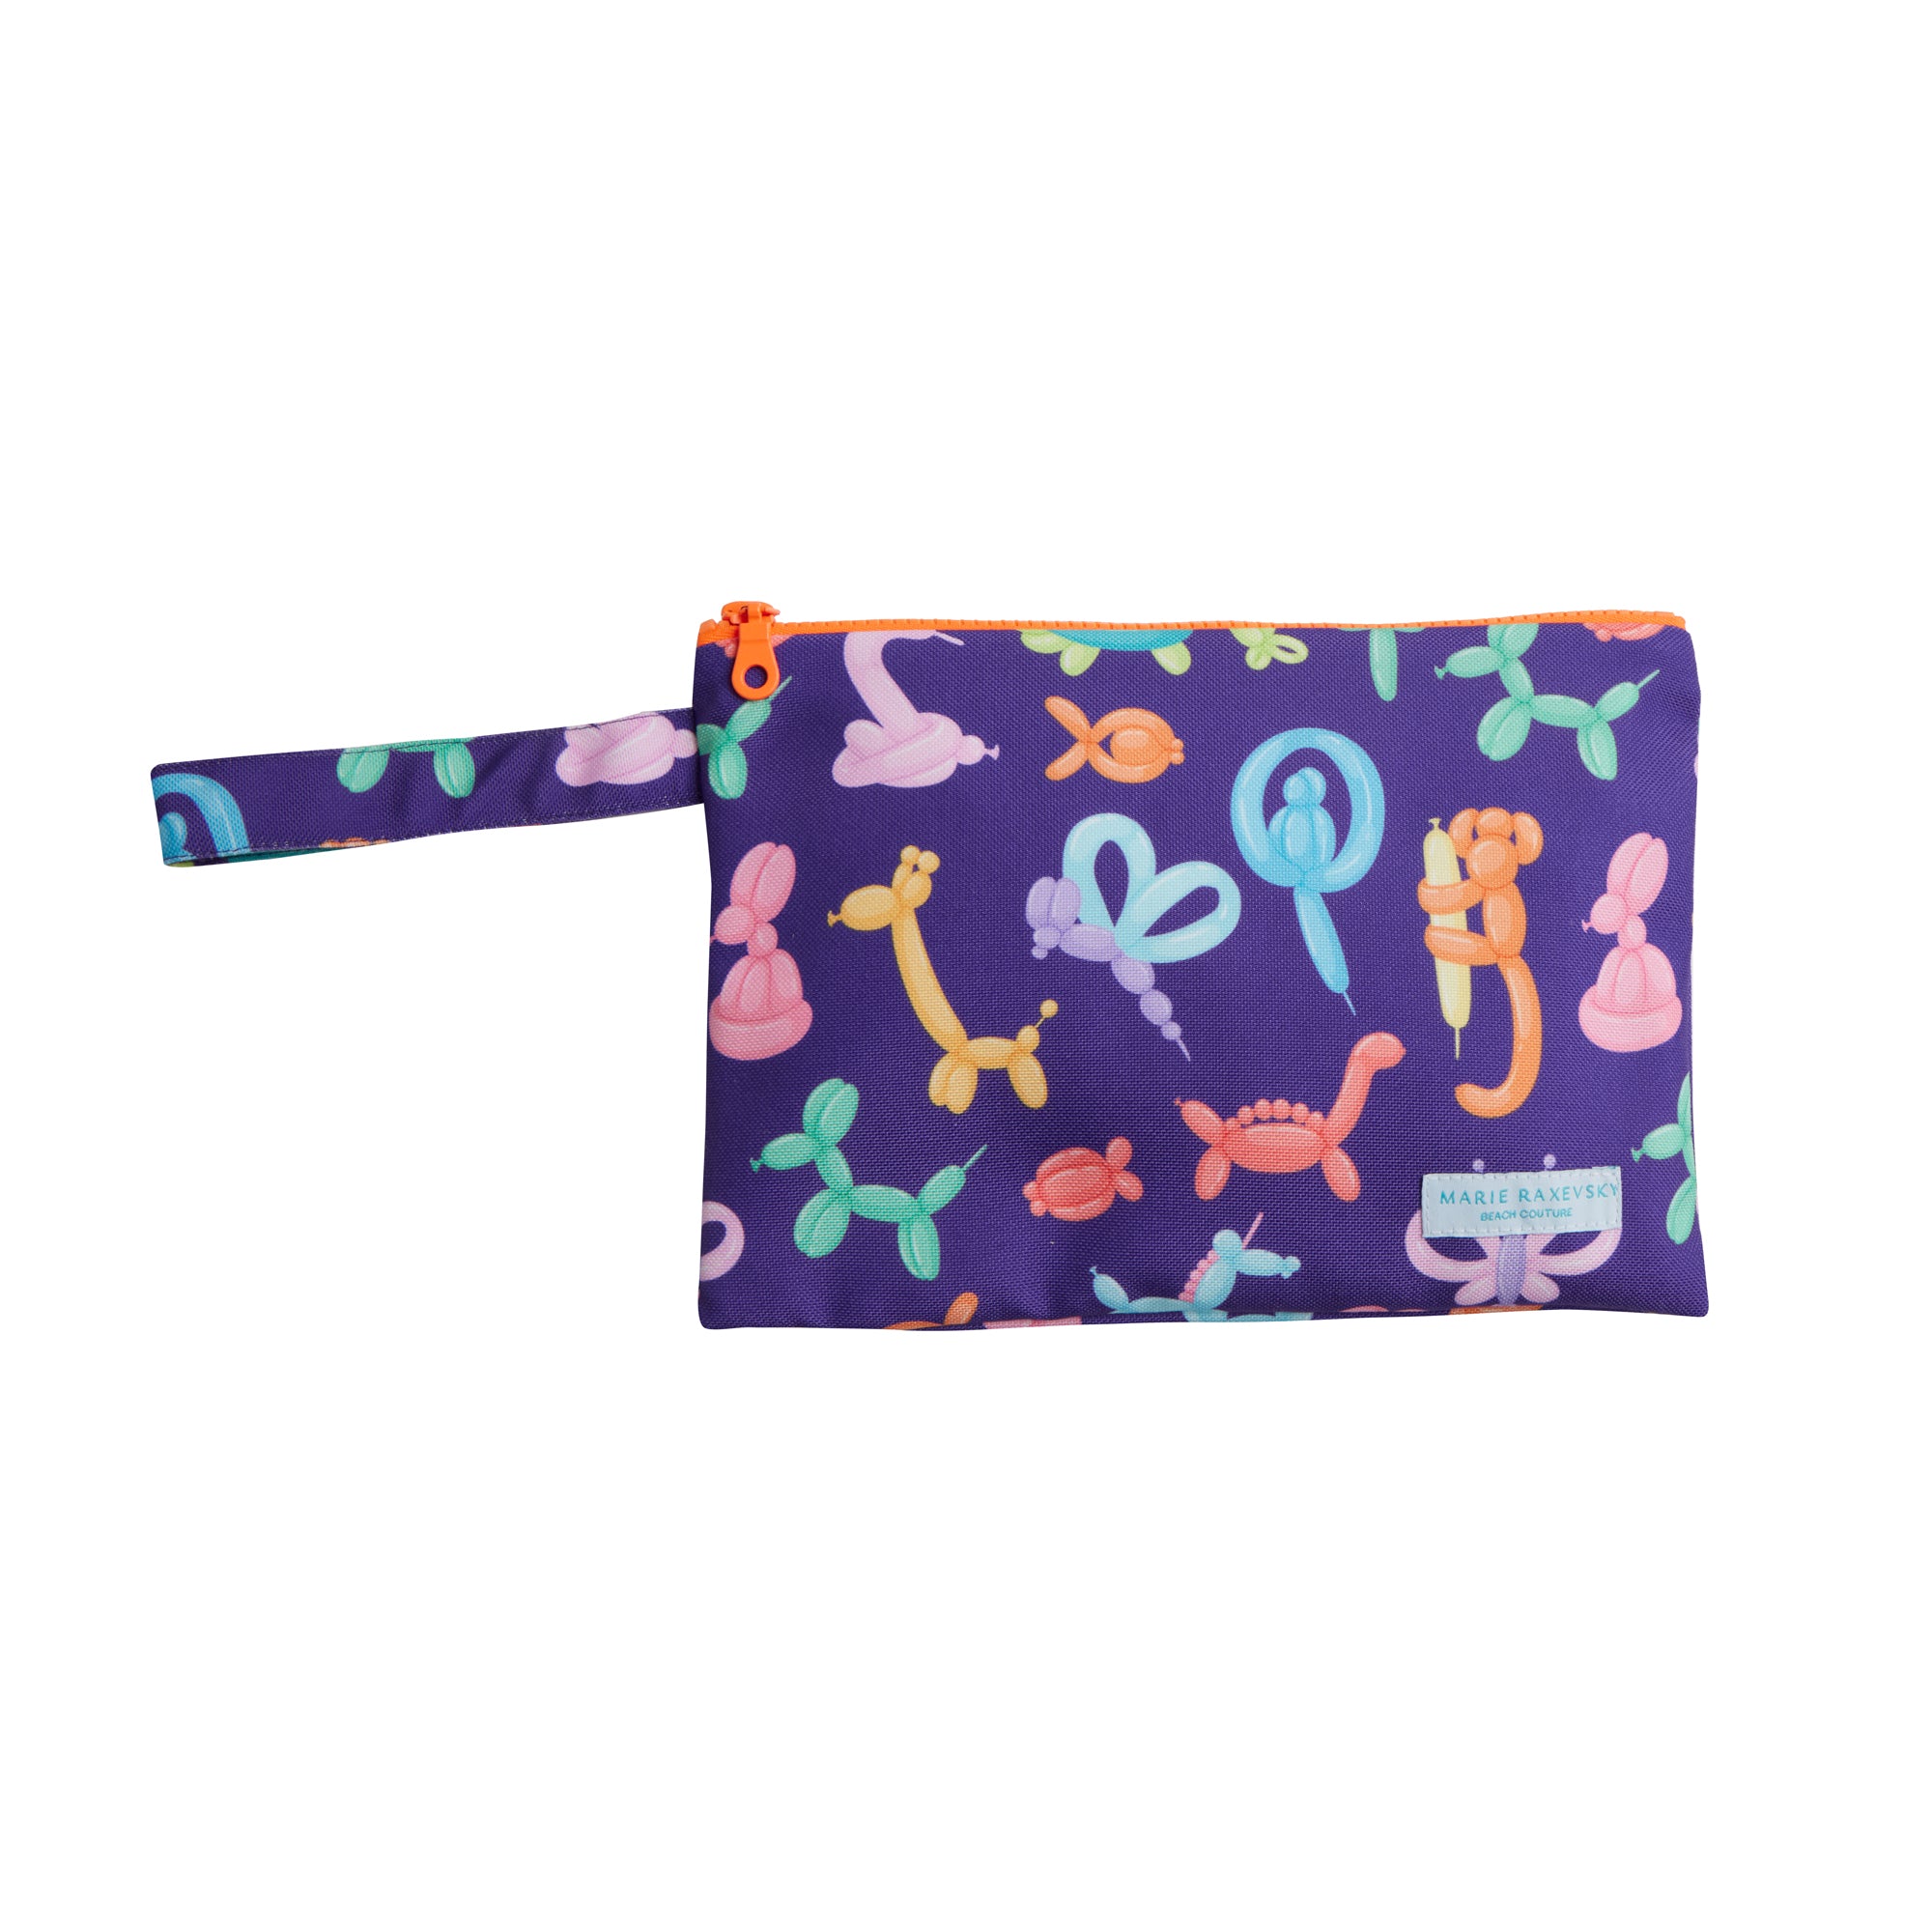 Marie Raxevsky POUCH LARGE BALLOONS